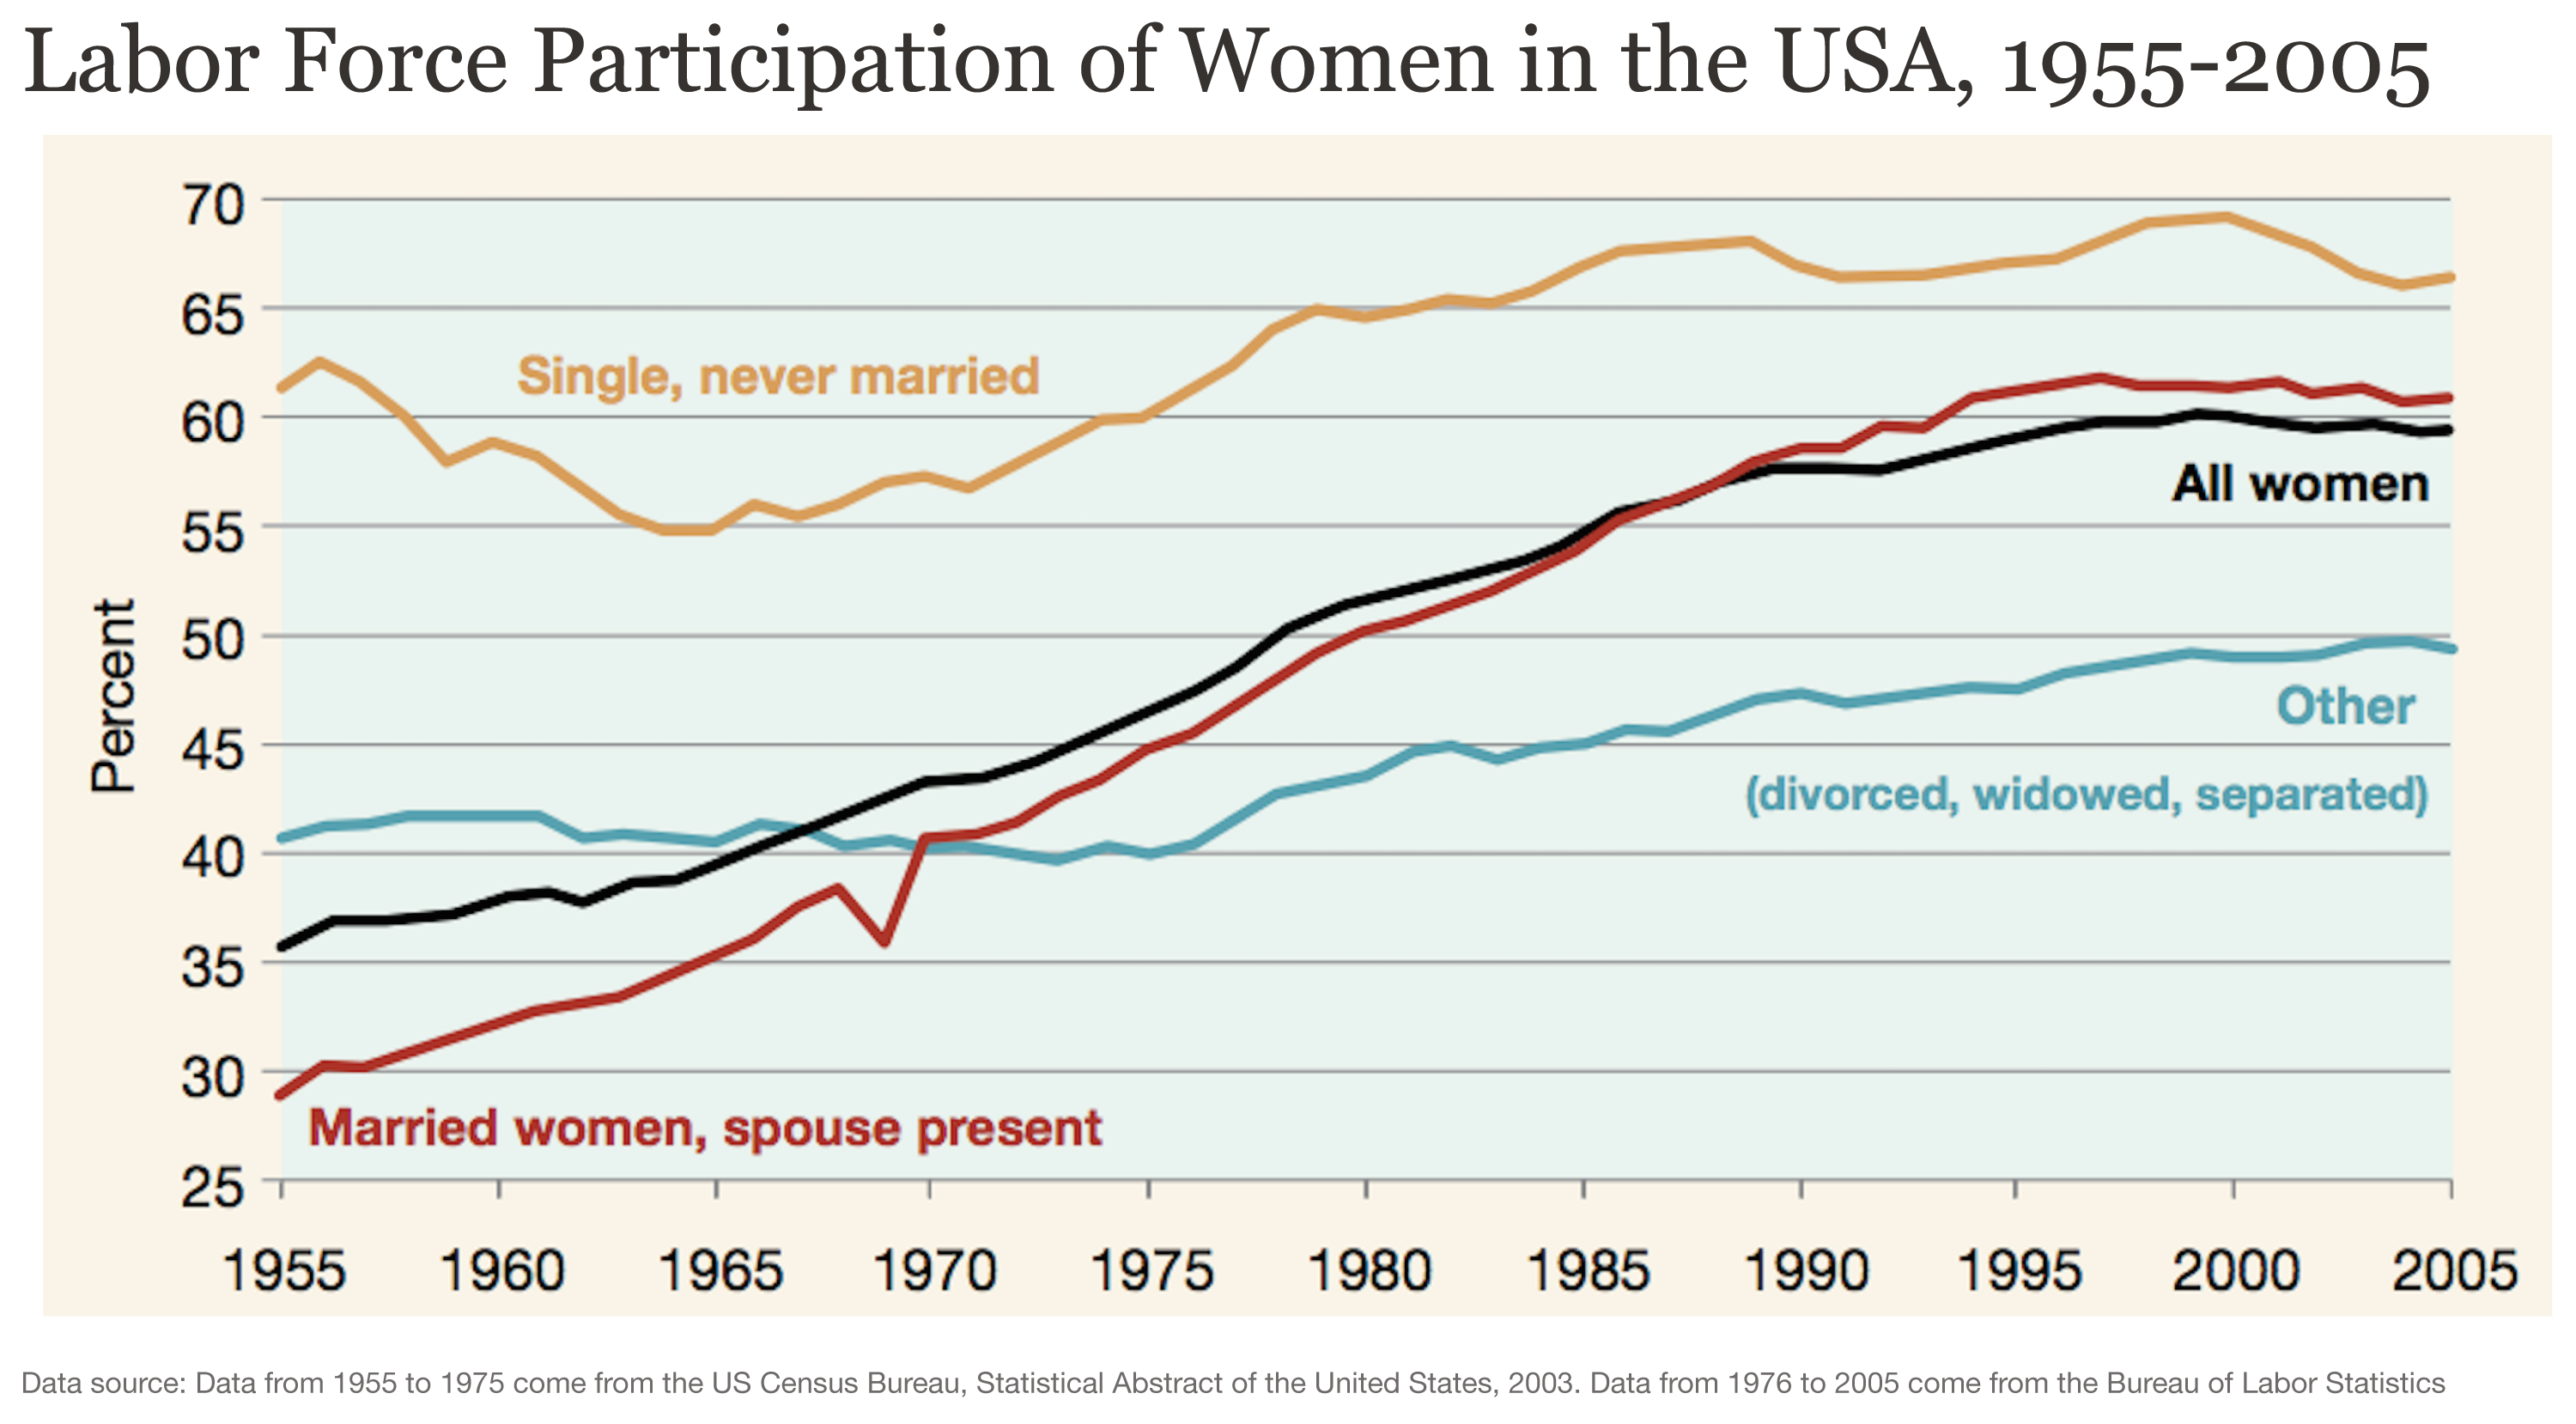 Line chart of of labor force participation of women in the US between 1955 and 2005, distinguishing between the shares of all women, of women that are single and never married, of married women with a present spouse, and of divorced, widowed, and separated women. The overall increase in the labor force participation of women is driven by married women with a present spouse.